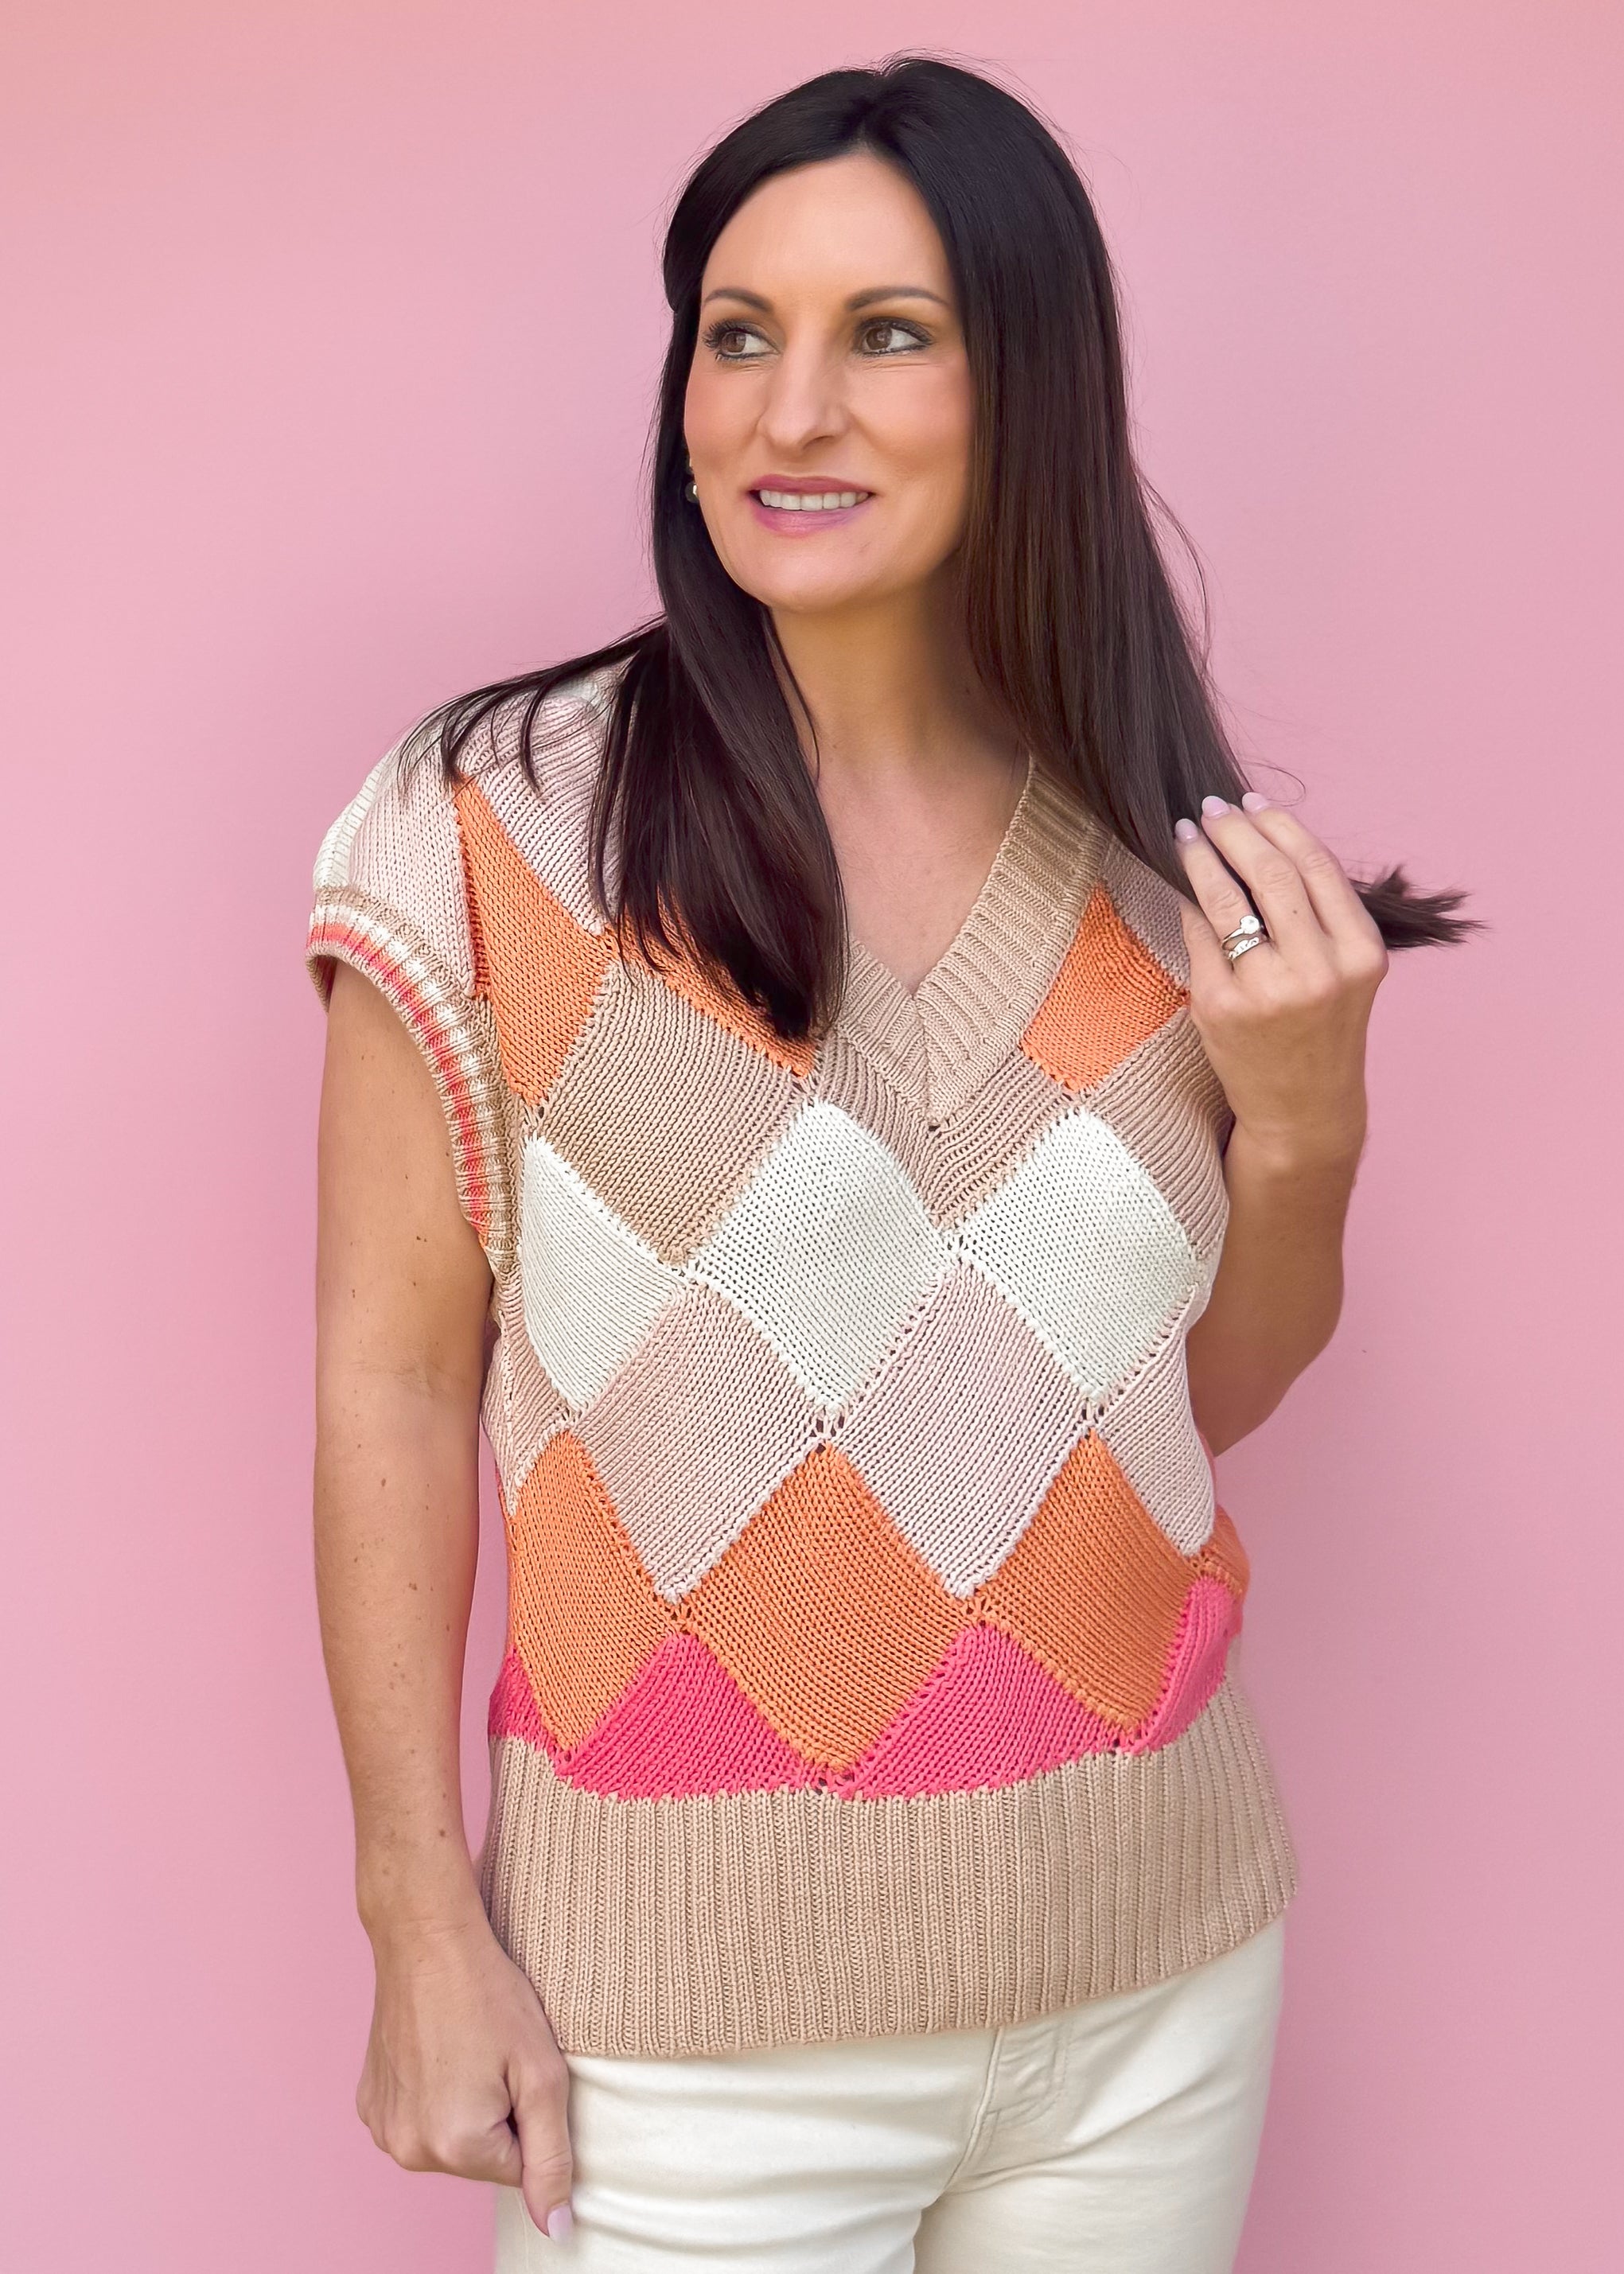 Another Love: Ashby Sweater Vest